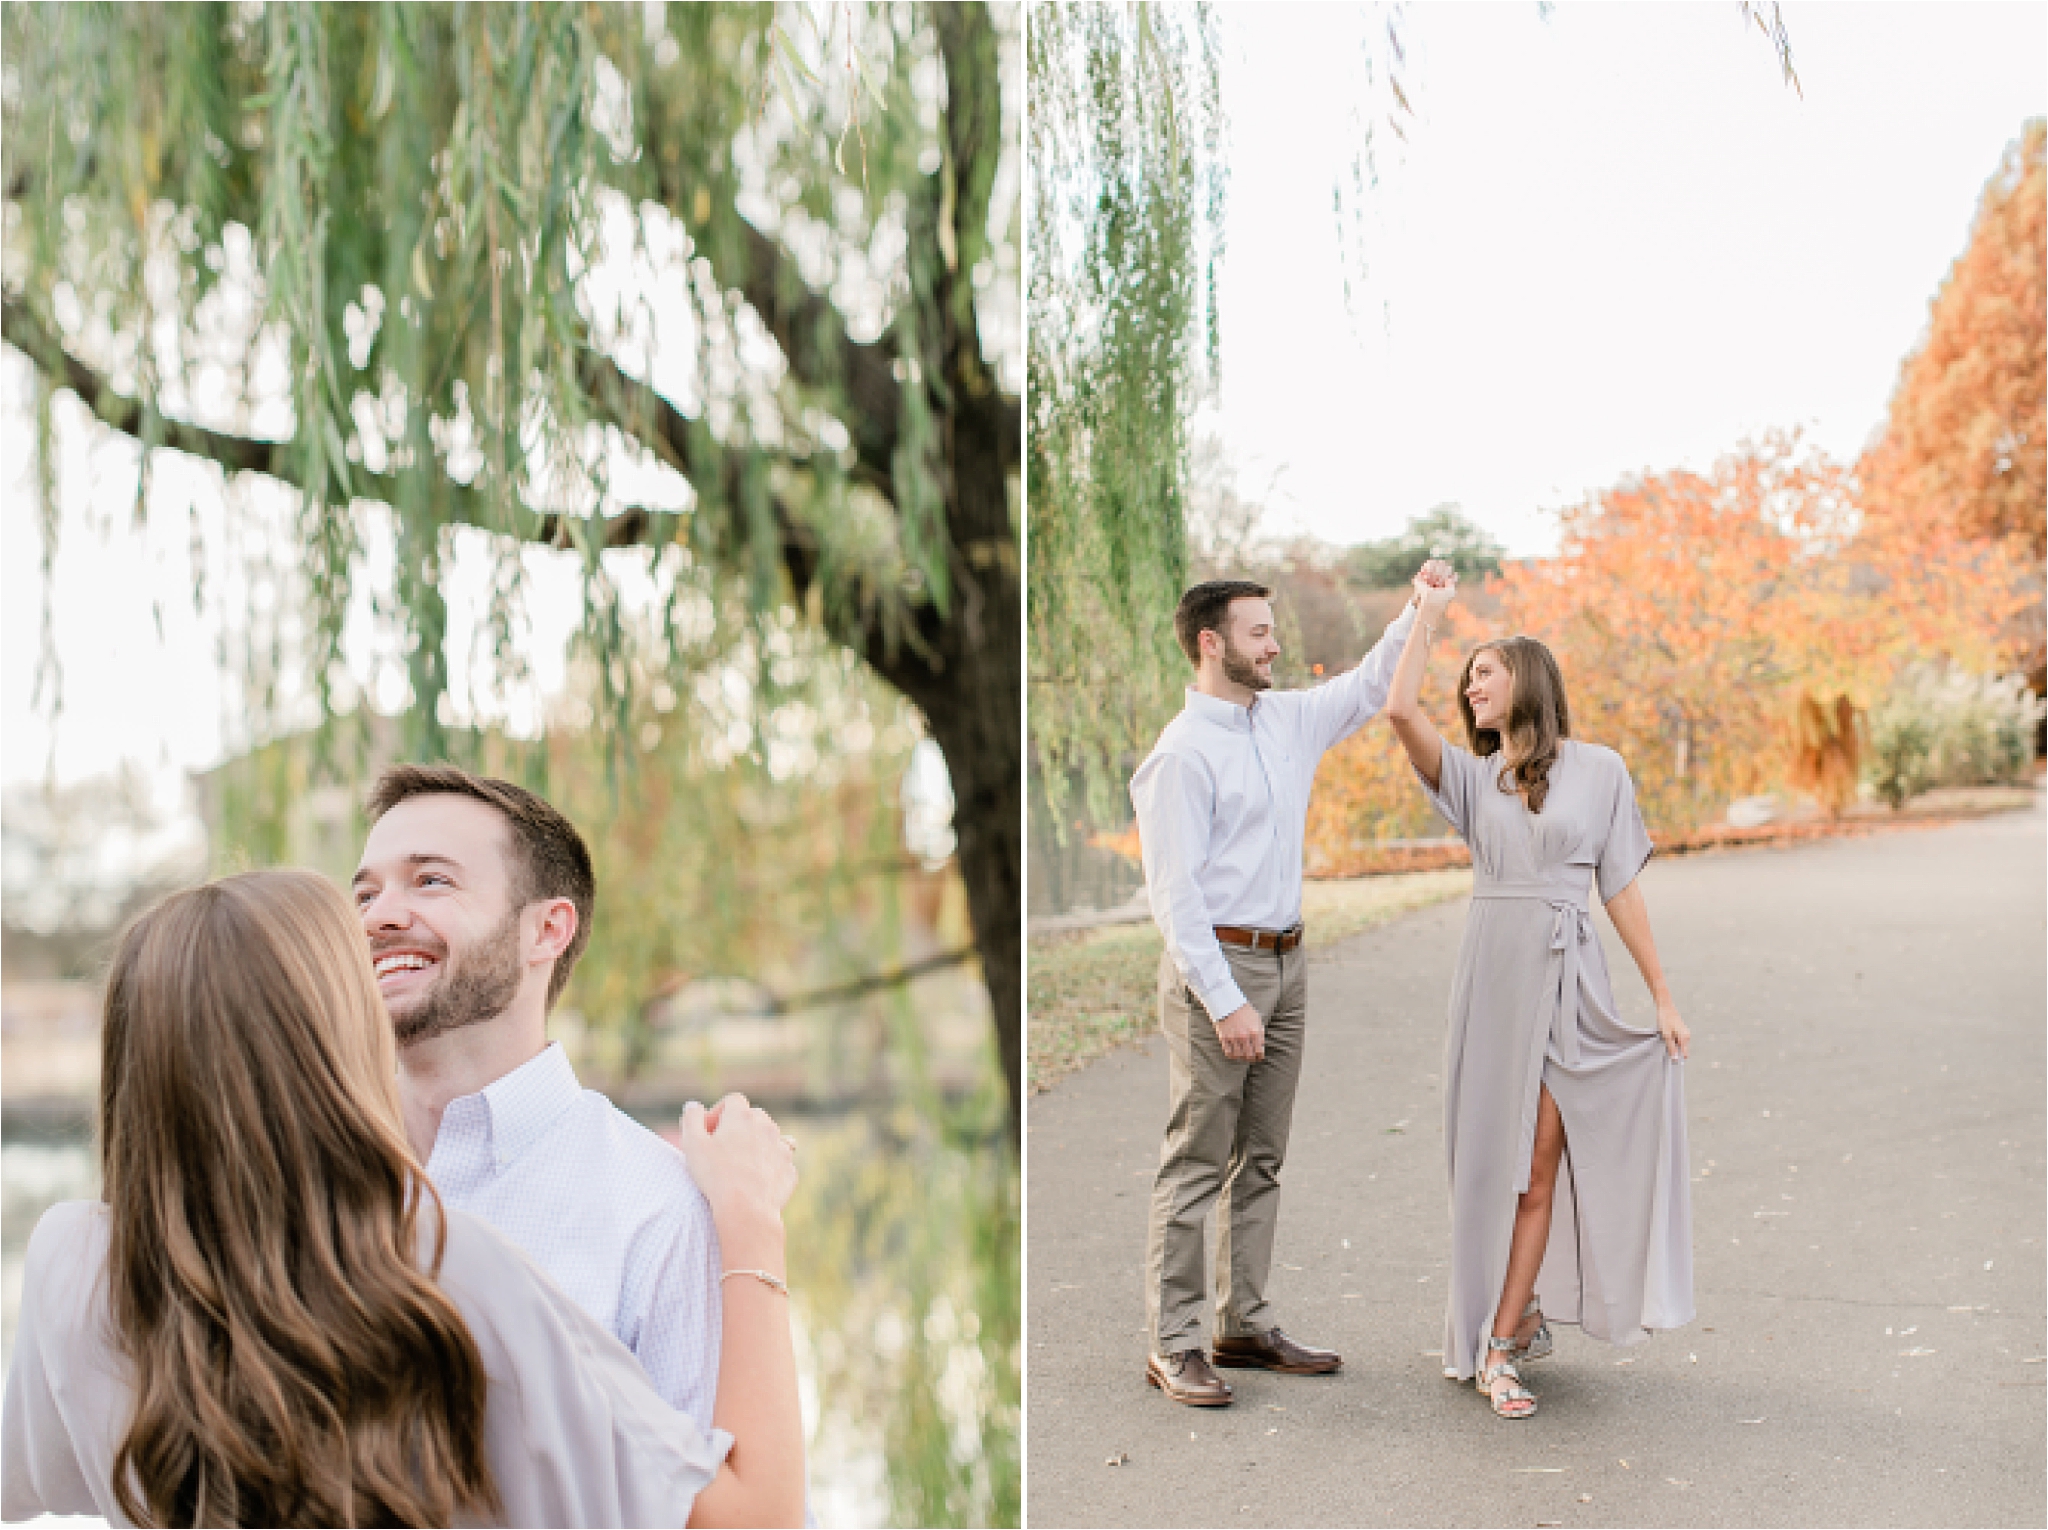 To see more images of this Centennial Park, Nashville Fall engagement session visit www.whitneywoodall.com.